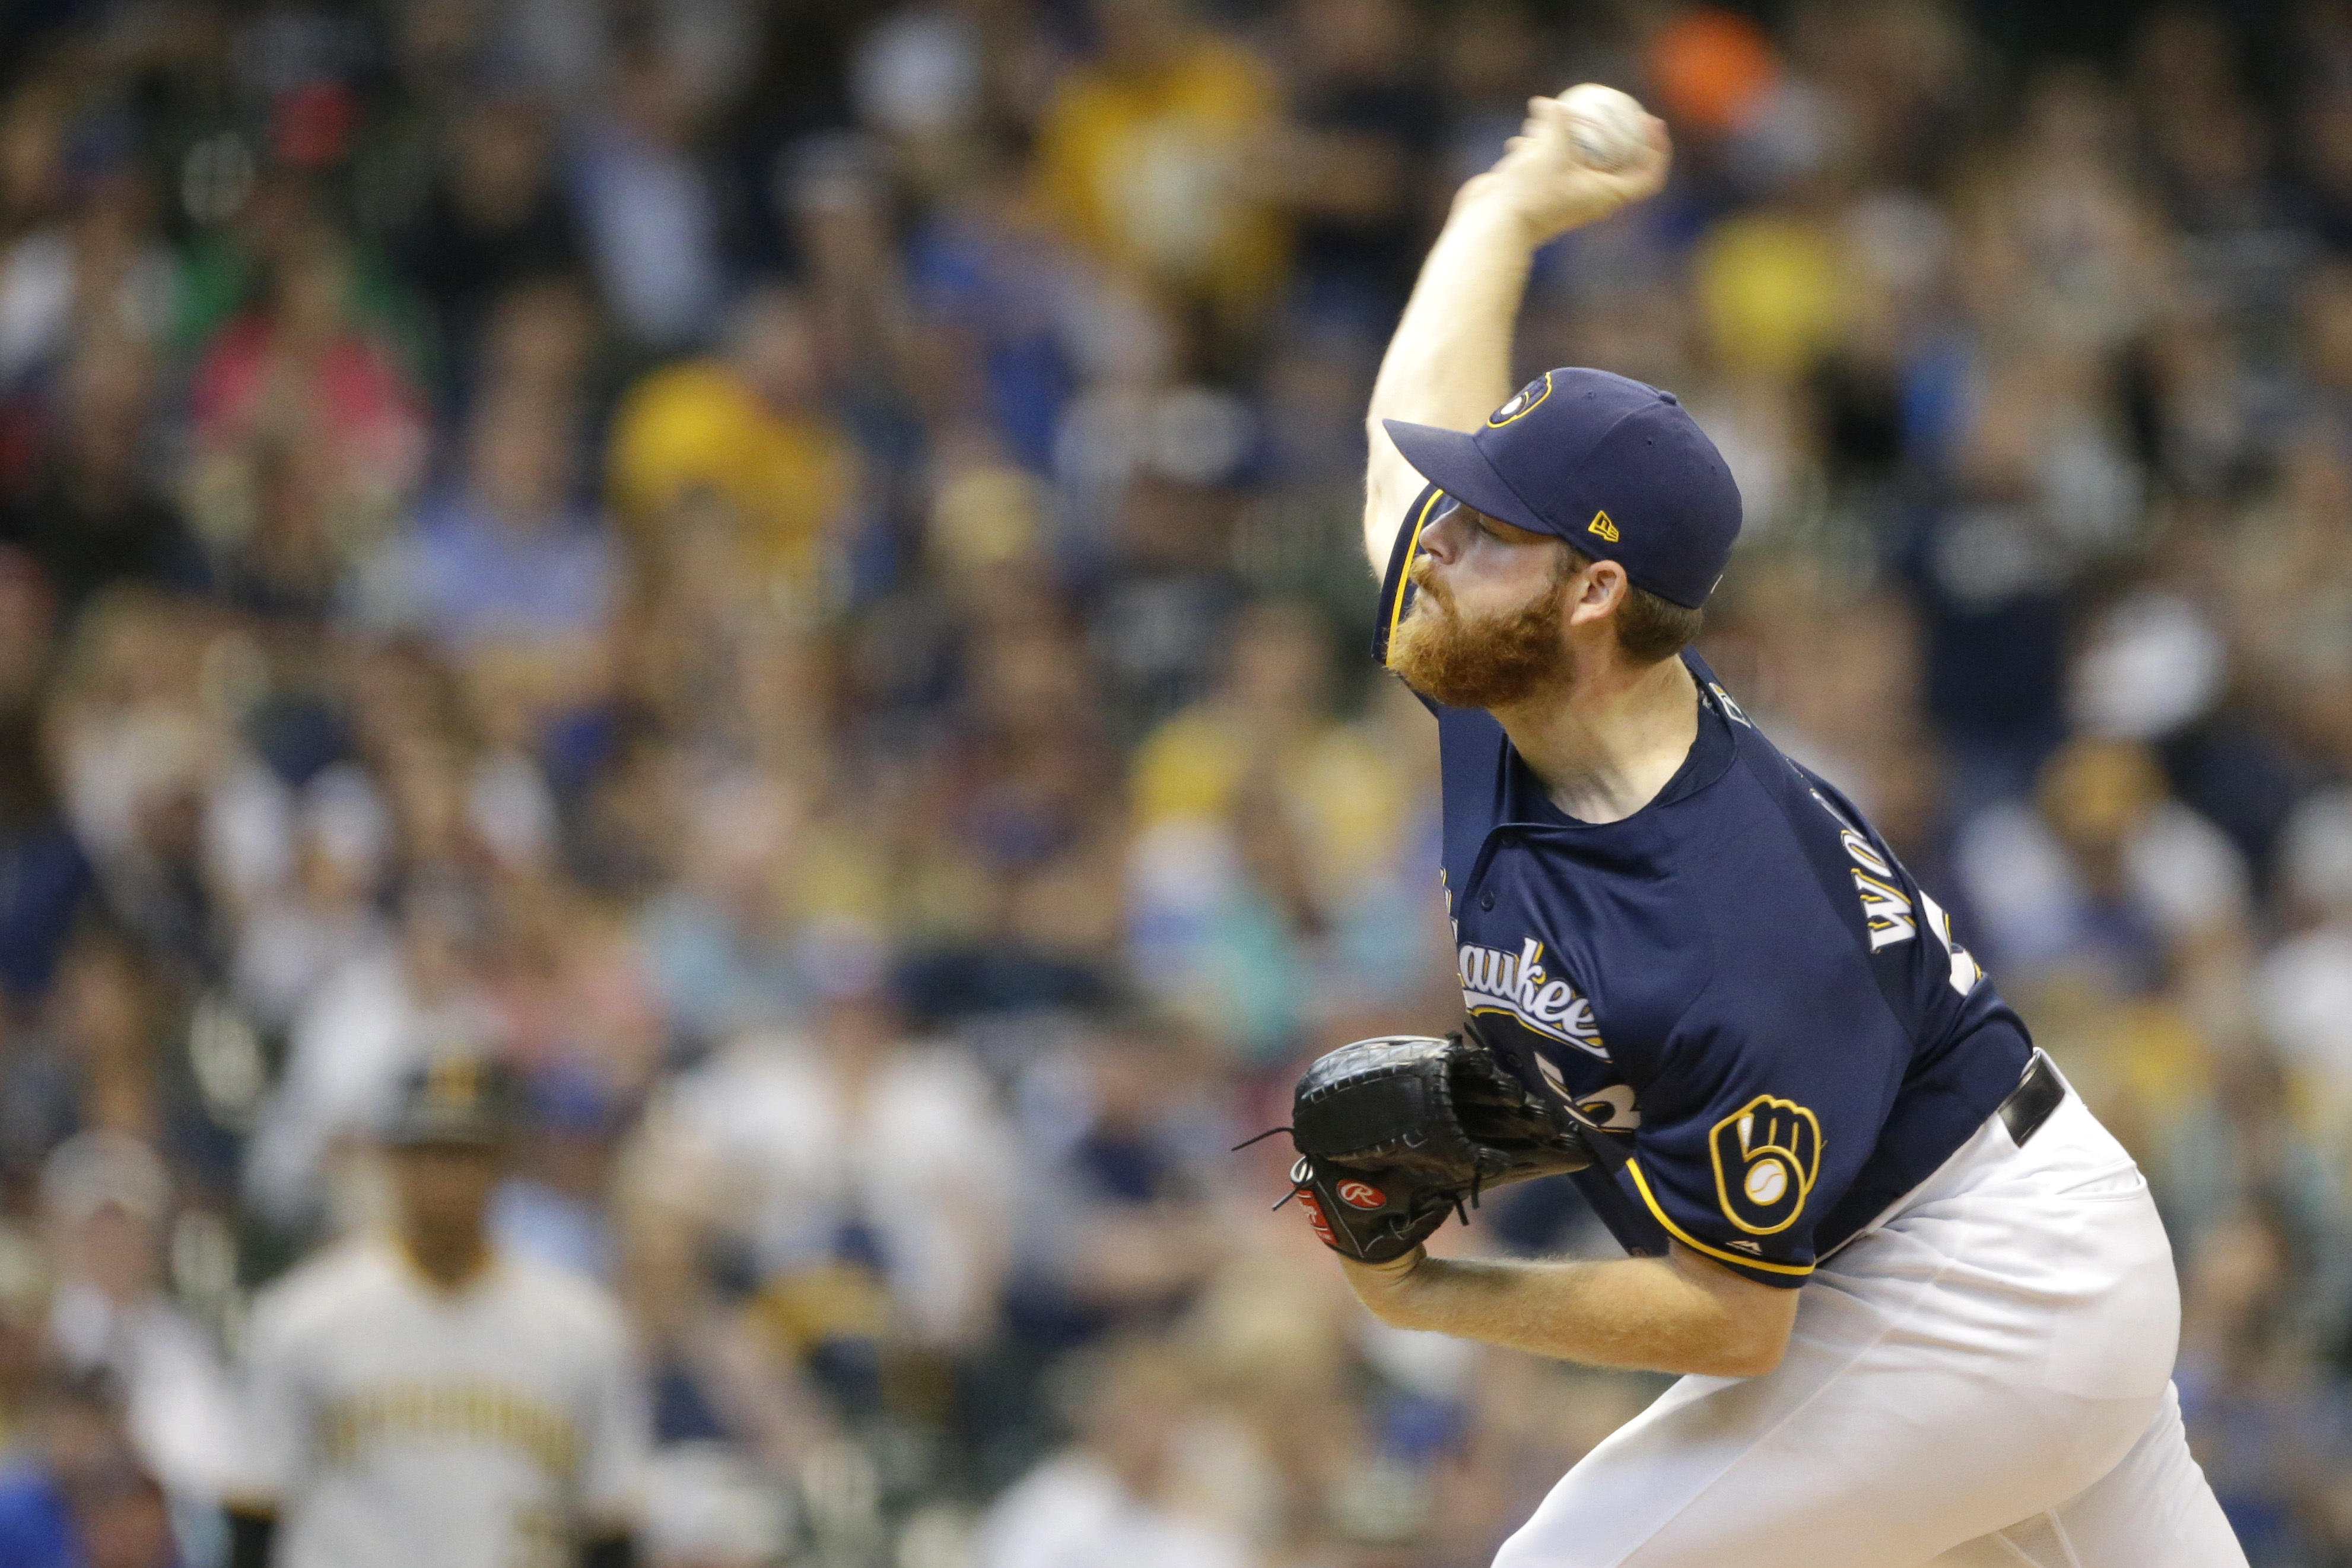 Brewers lose combined perfect game on hit off Arcia's glove